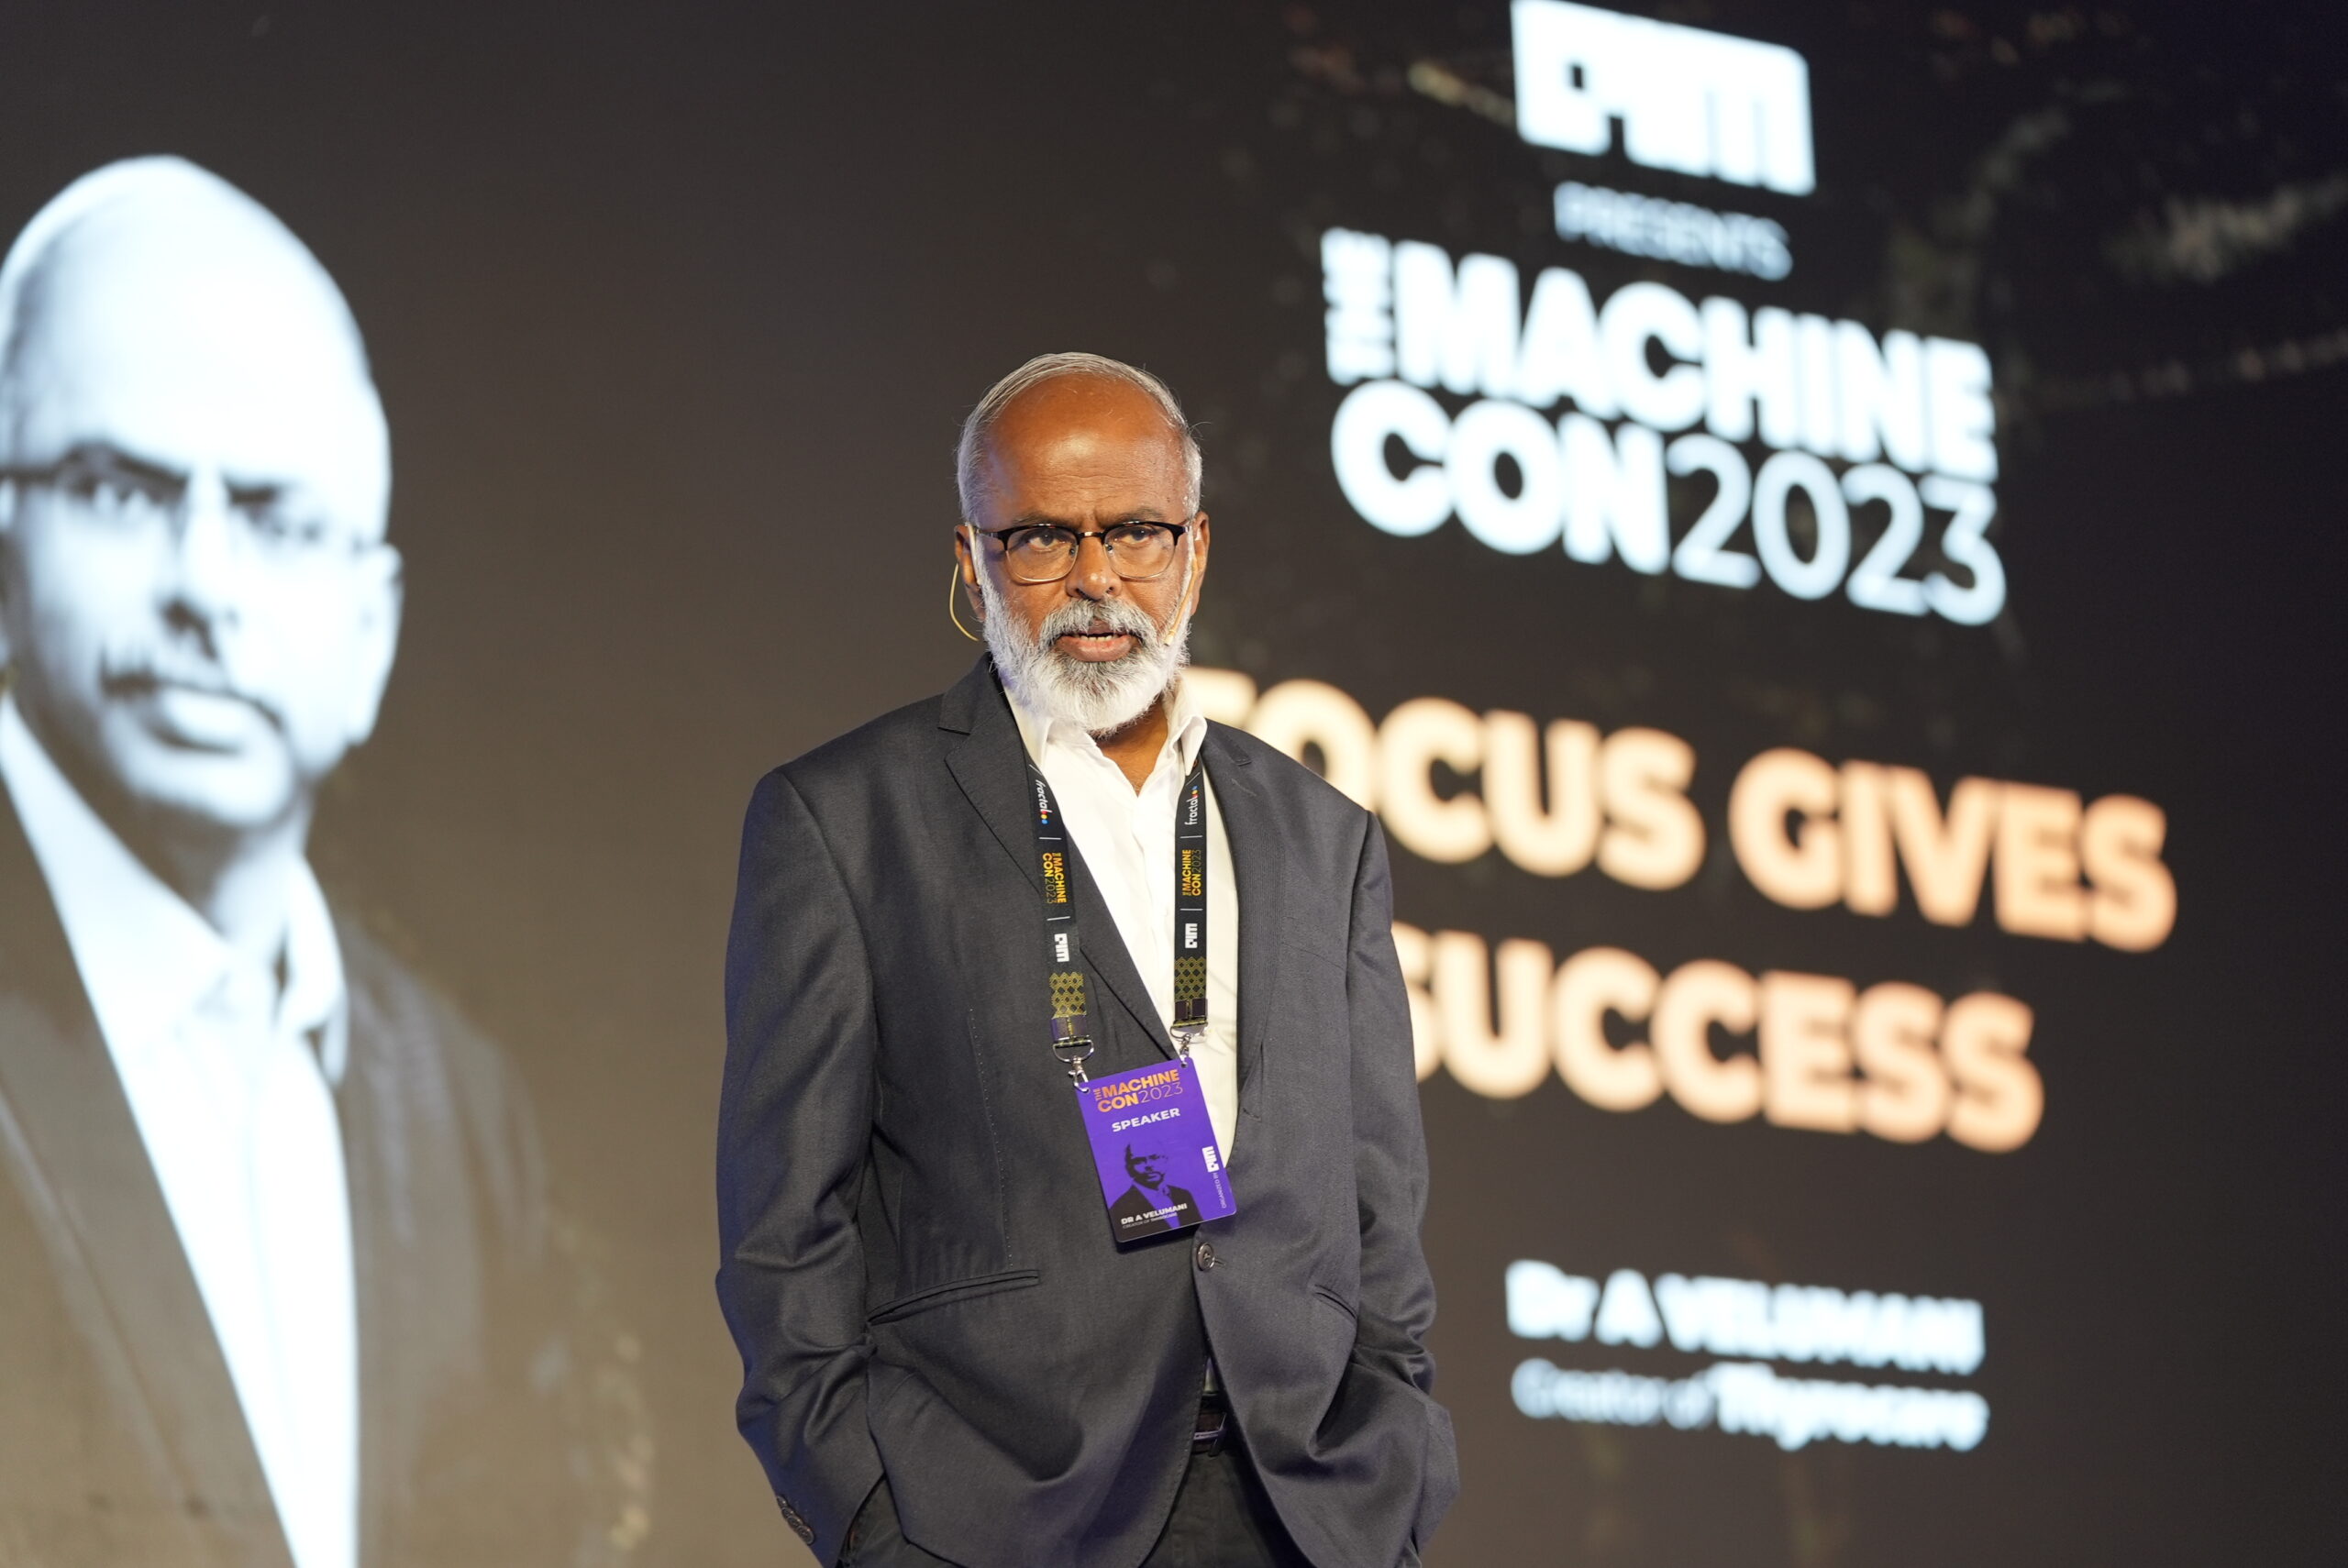 Dr. A Velumani as a guest speaker for a corporate event in Bangalore